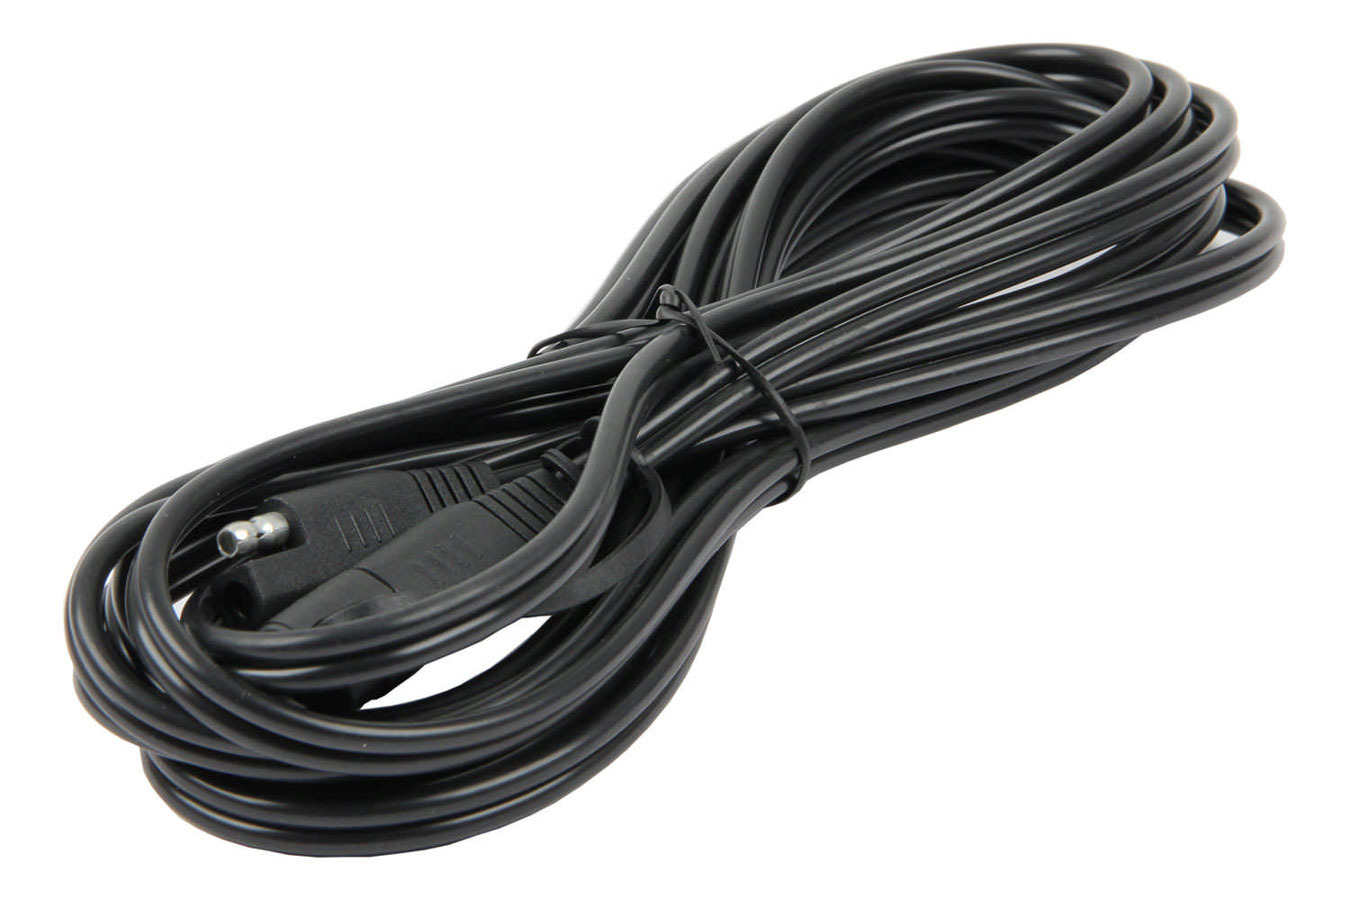 BATTERY TENDER Battery Charger Harness, Battery Tender Extension Lead, 12.5 ft Long, Quick Connect, 12V Models Only, Black Qu